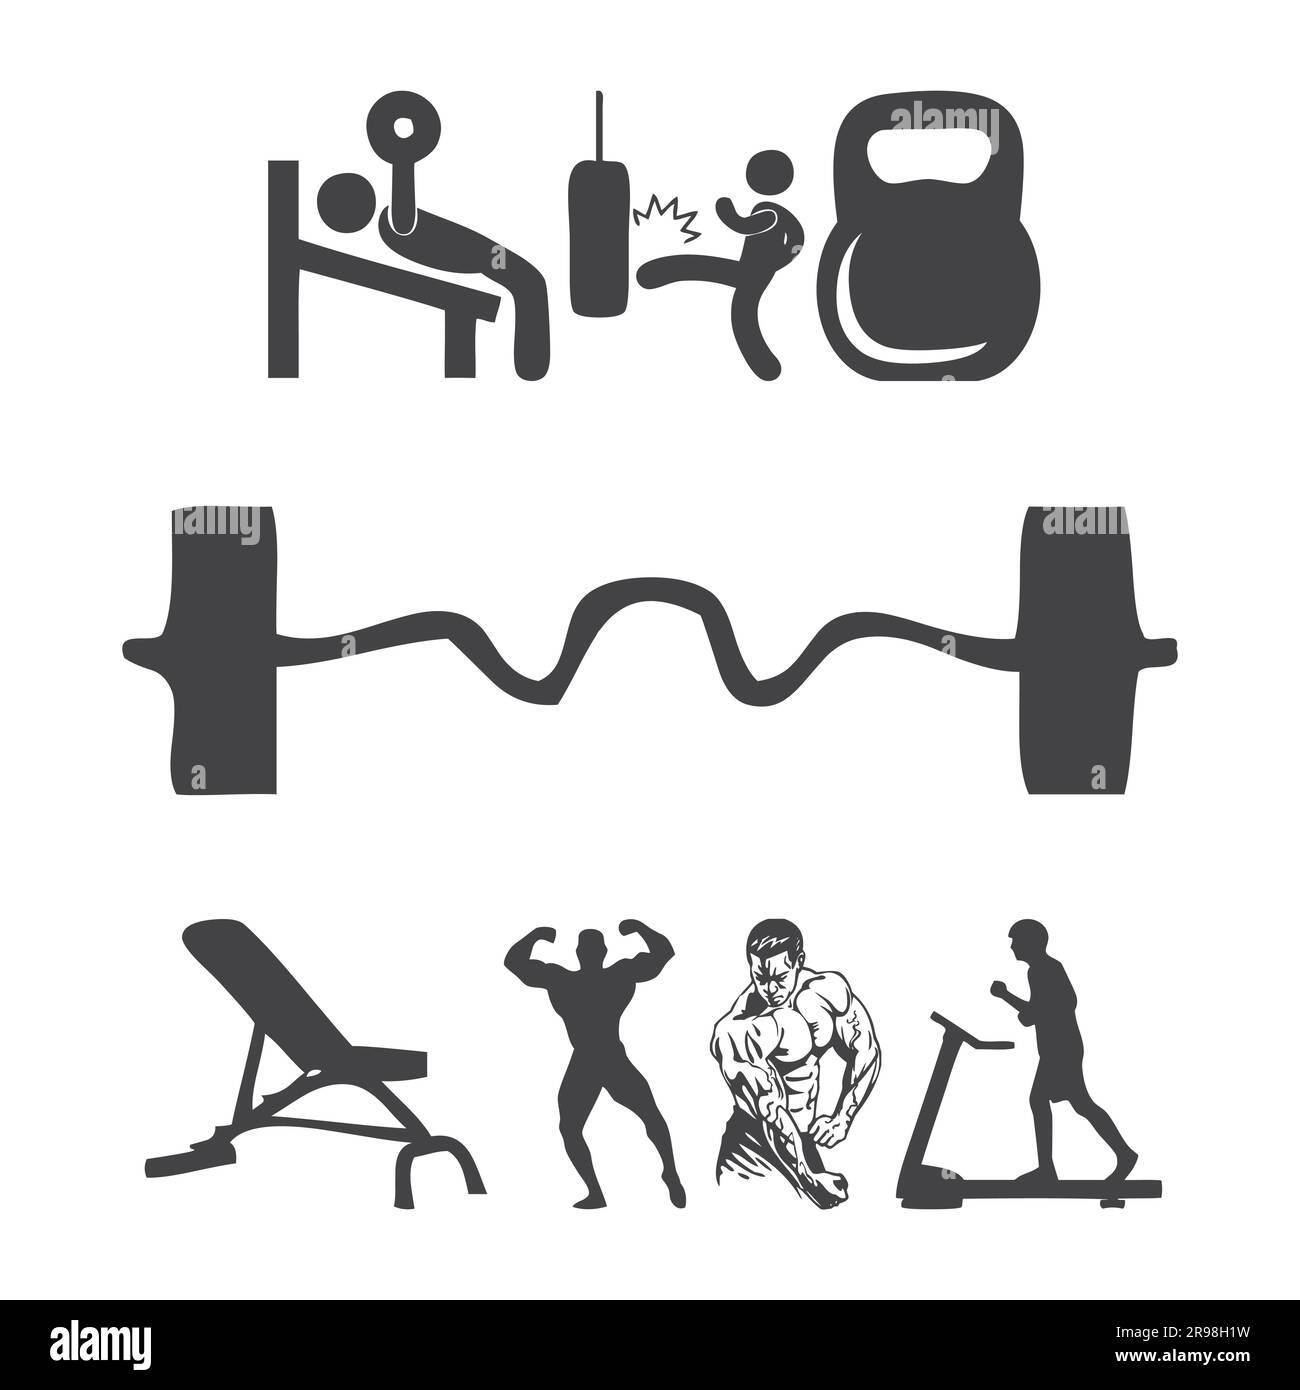 vector gym icons collection Stock Vector